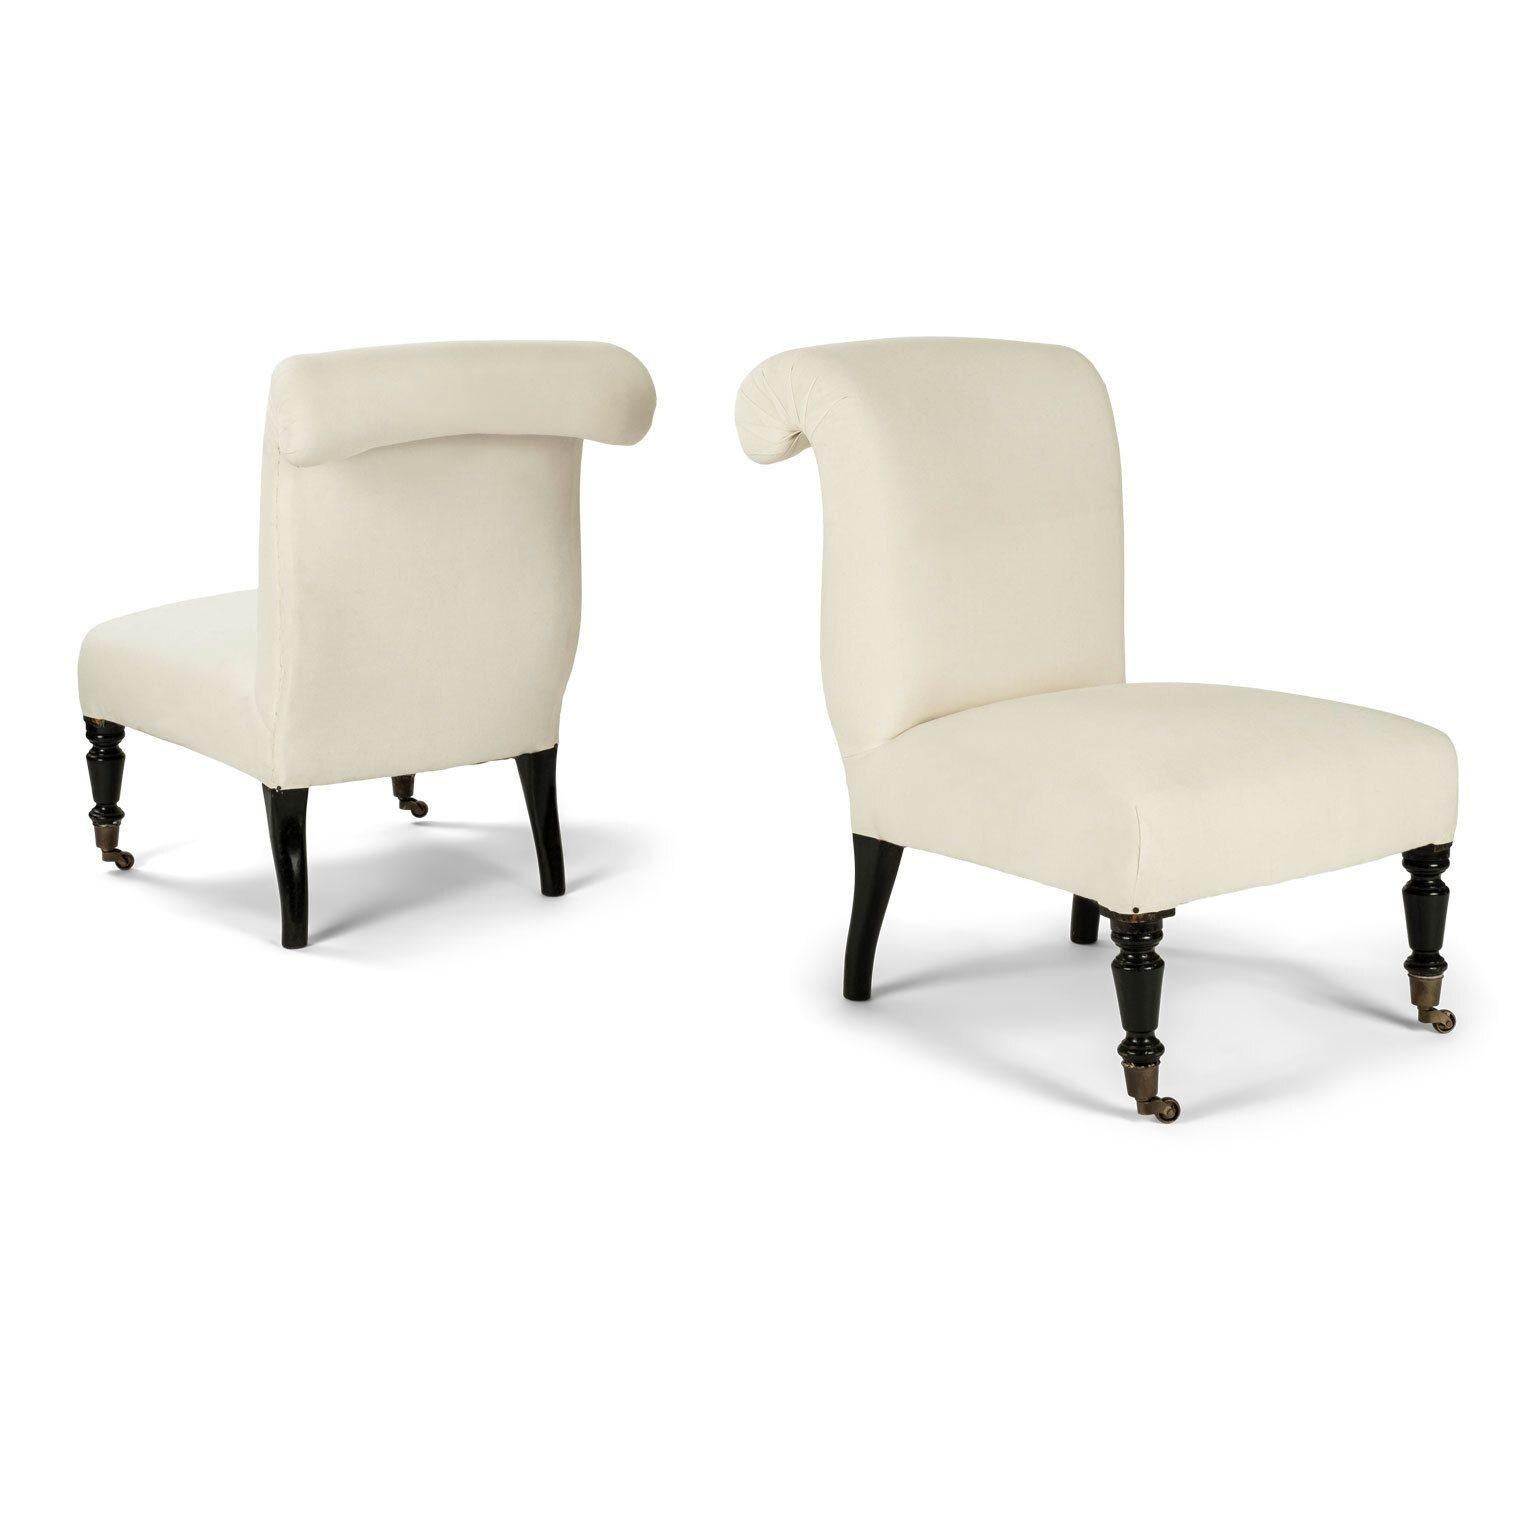 19th Century Pair of French Napoleon III Slipper Chairs Upholstered in White Linen